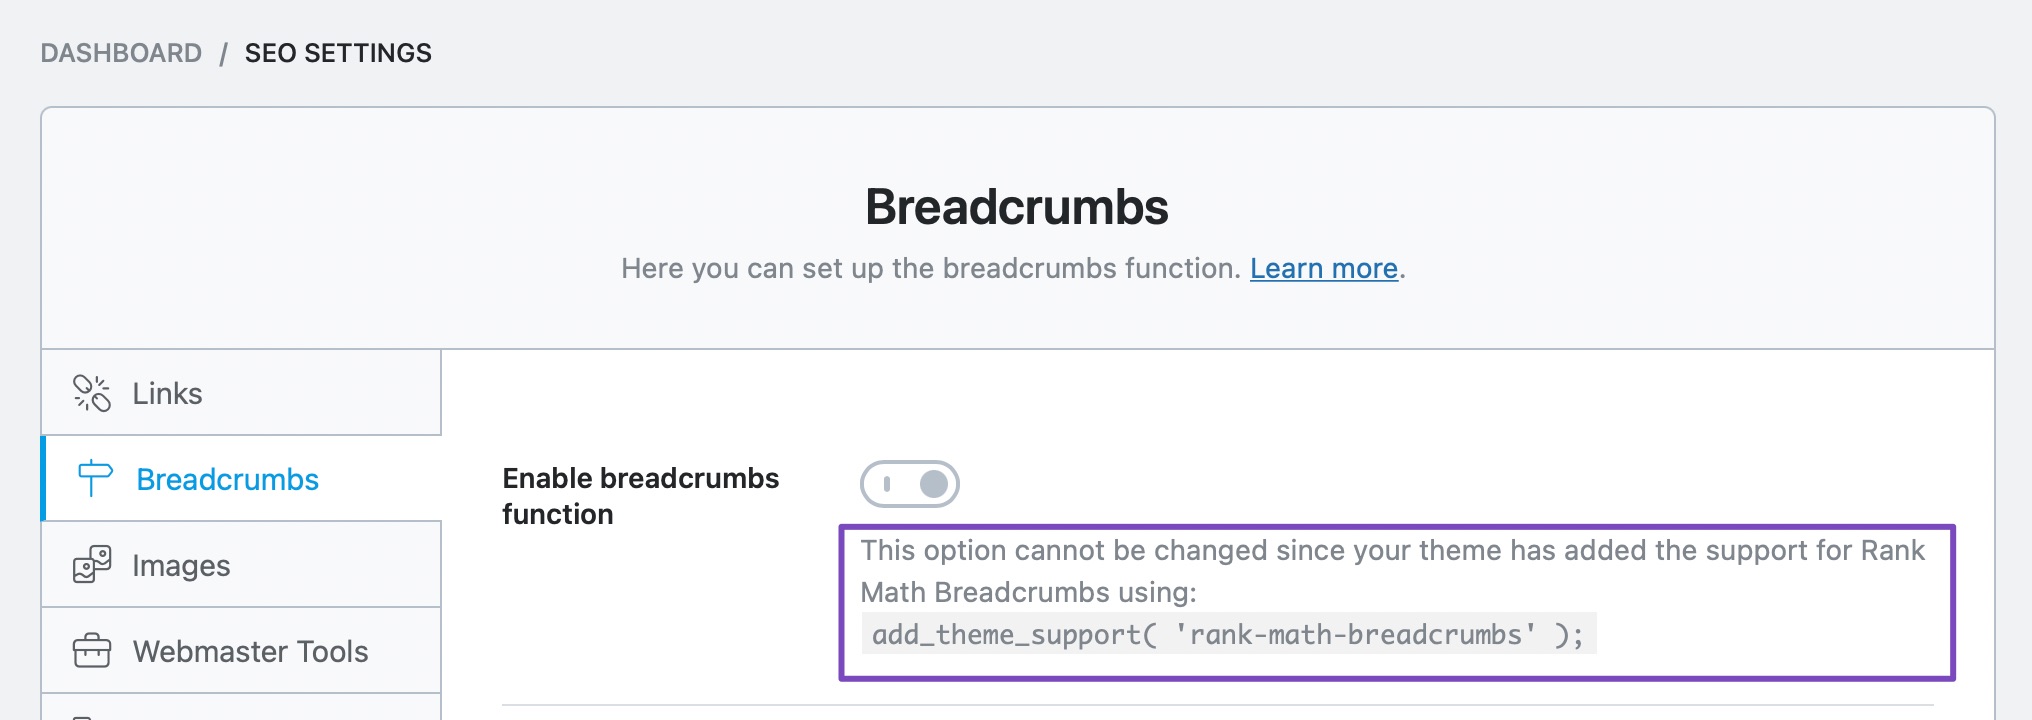 Enable breadcrumbs feature with theme support